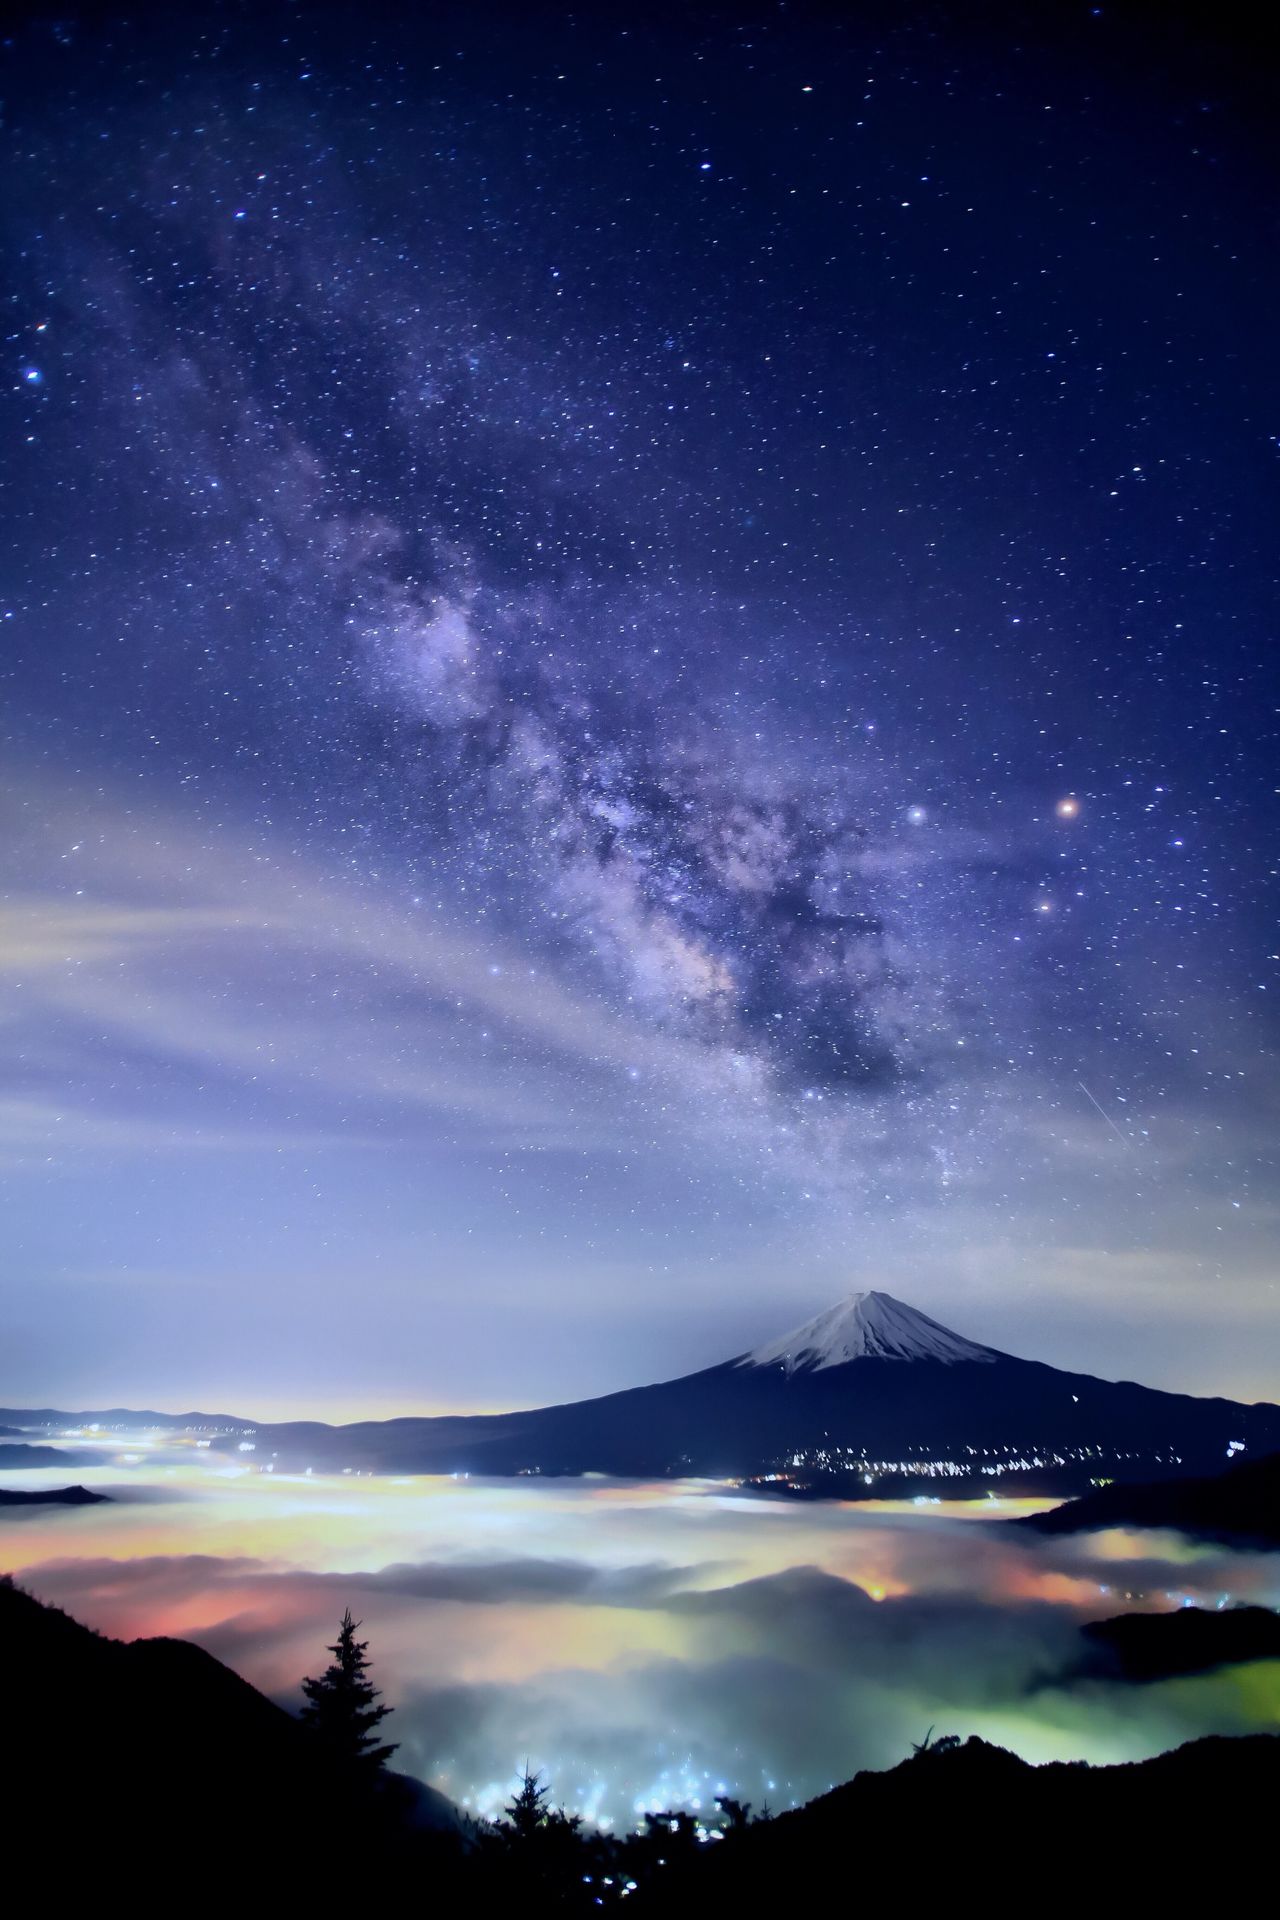 Hashimuki’s nighttime photos are also renowned for their beauty. Here the mountain, the Milky Way, and a sea of clouds underlit by city lights create a breathtaking harmony.